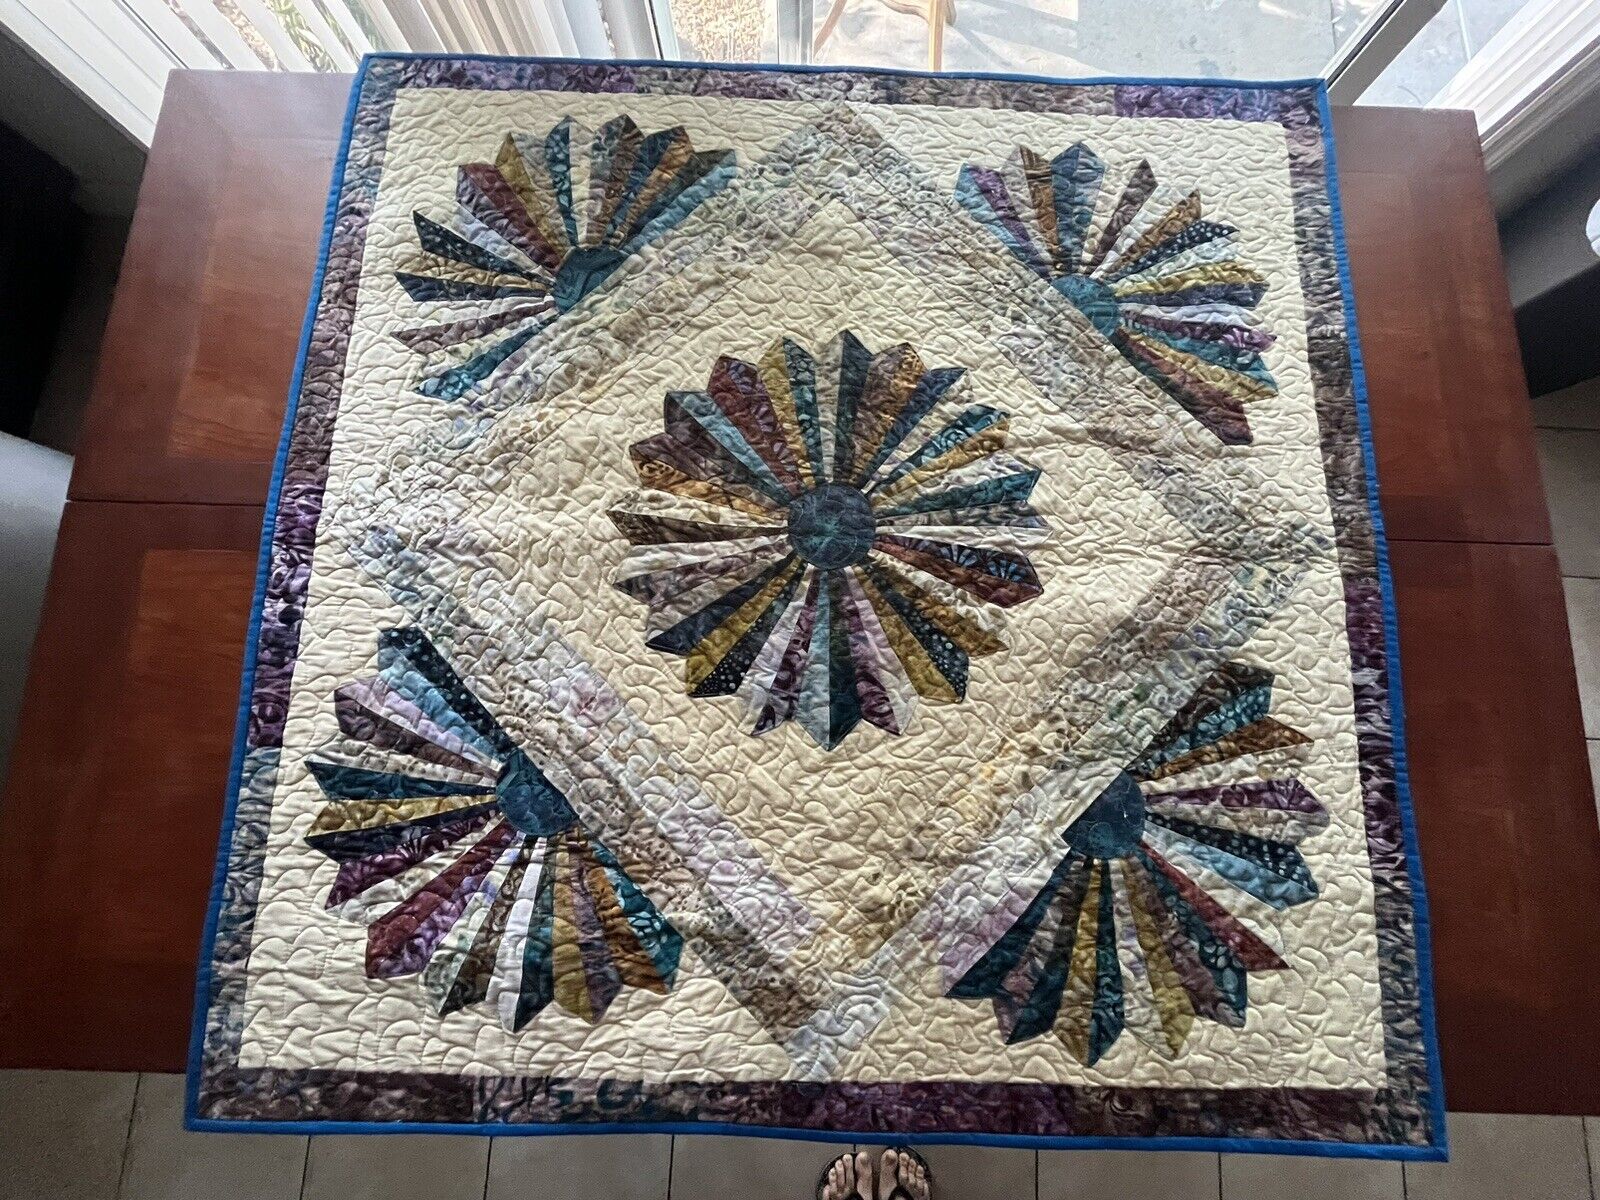 Vintage Square Quilt 43 X 43” Dresden Bloom Plate Hand Stitched Intricate Detail